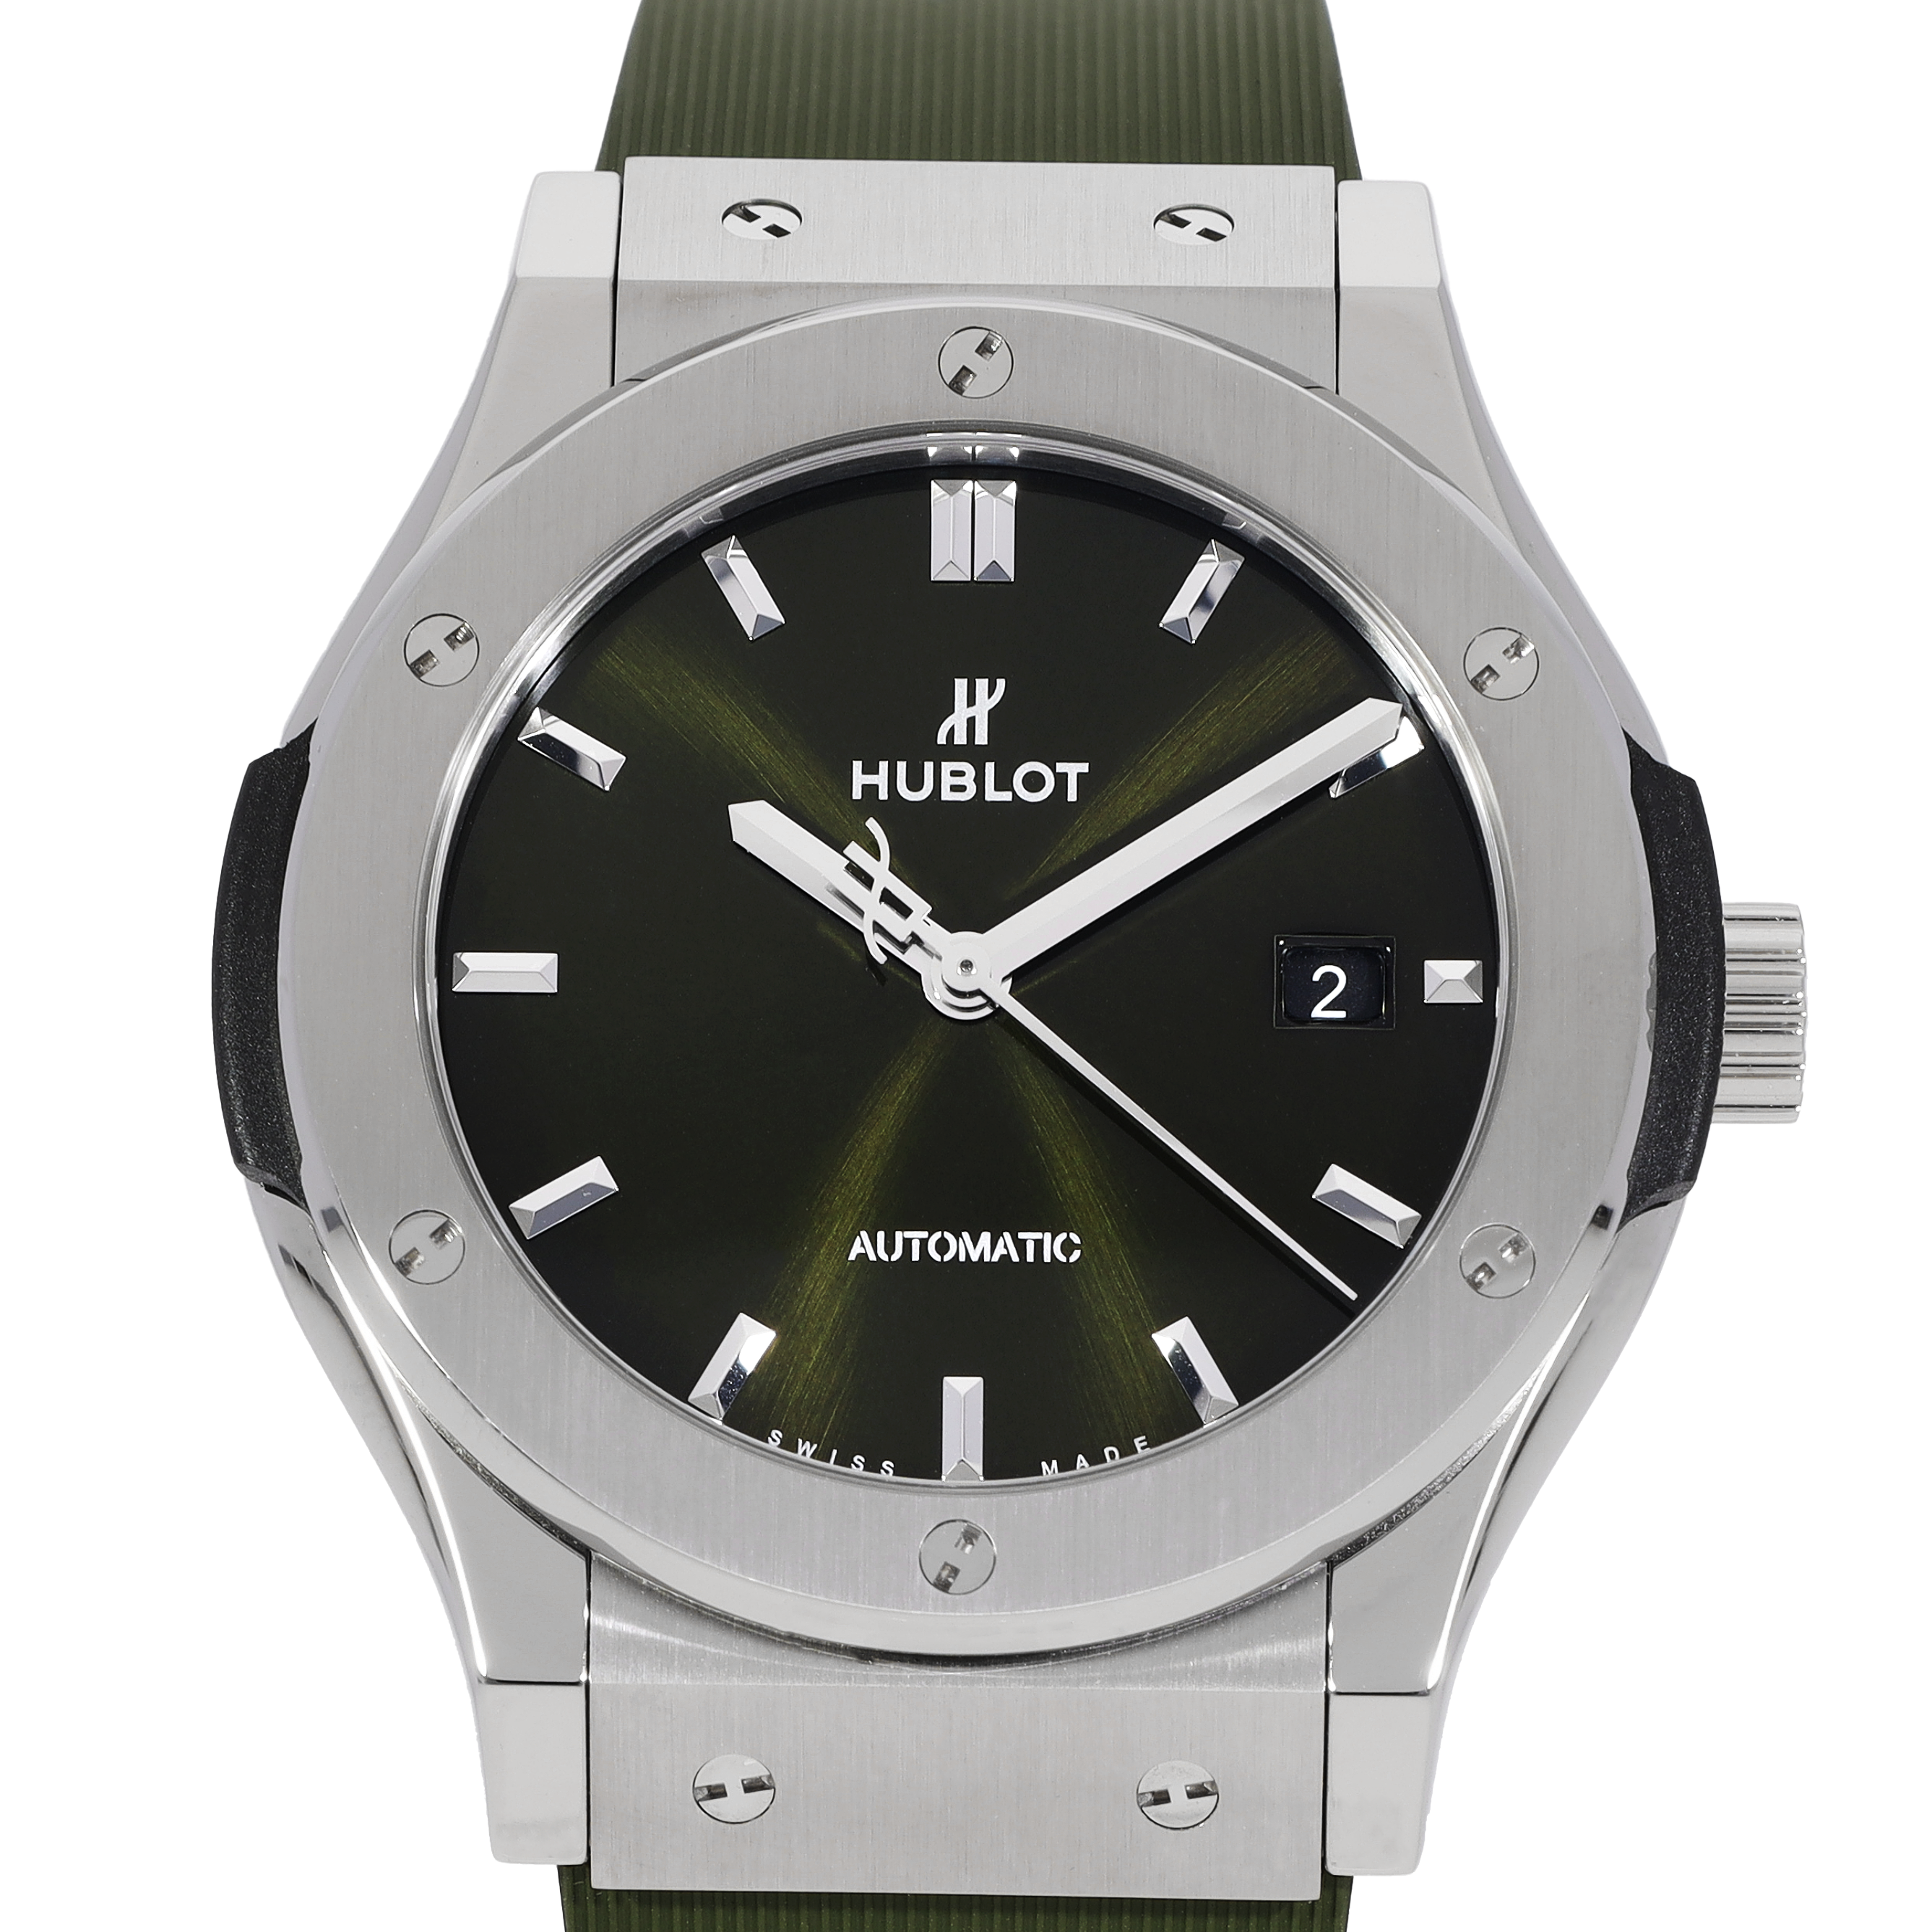 Buy Hublot watches, Certified Authenticity